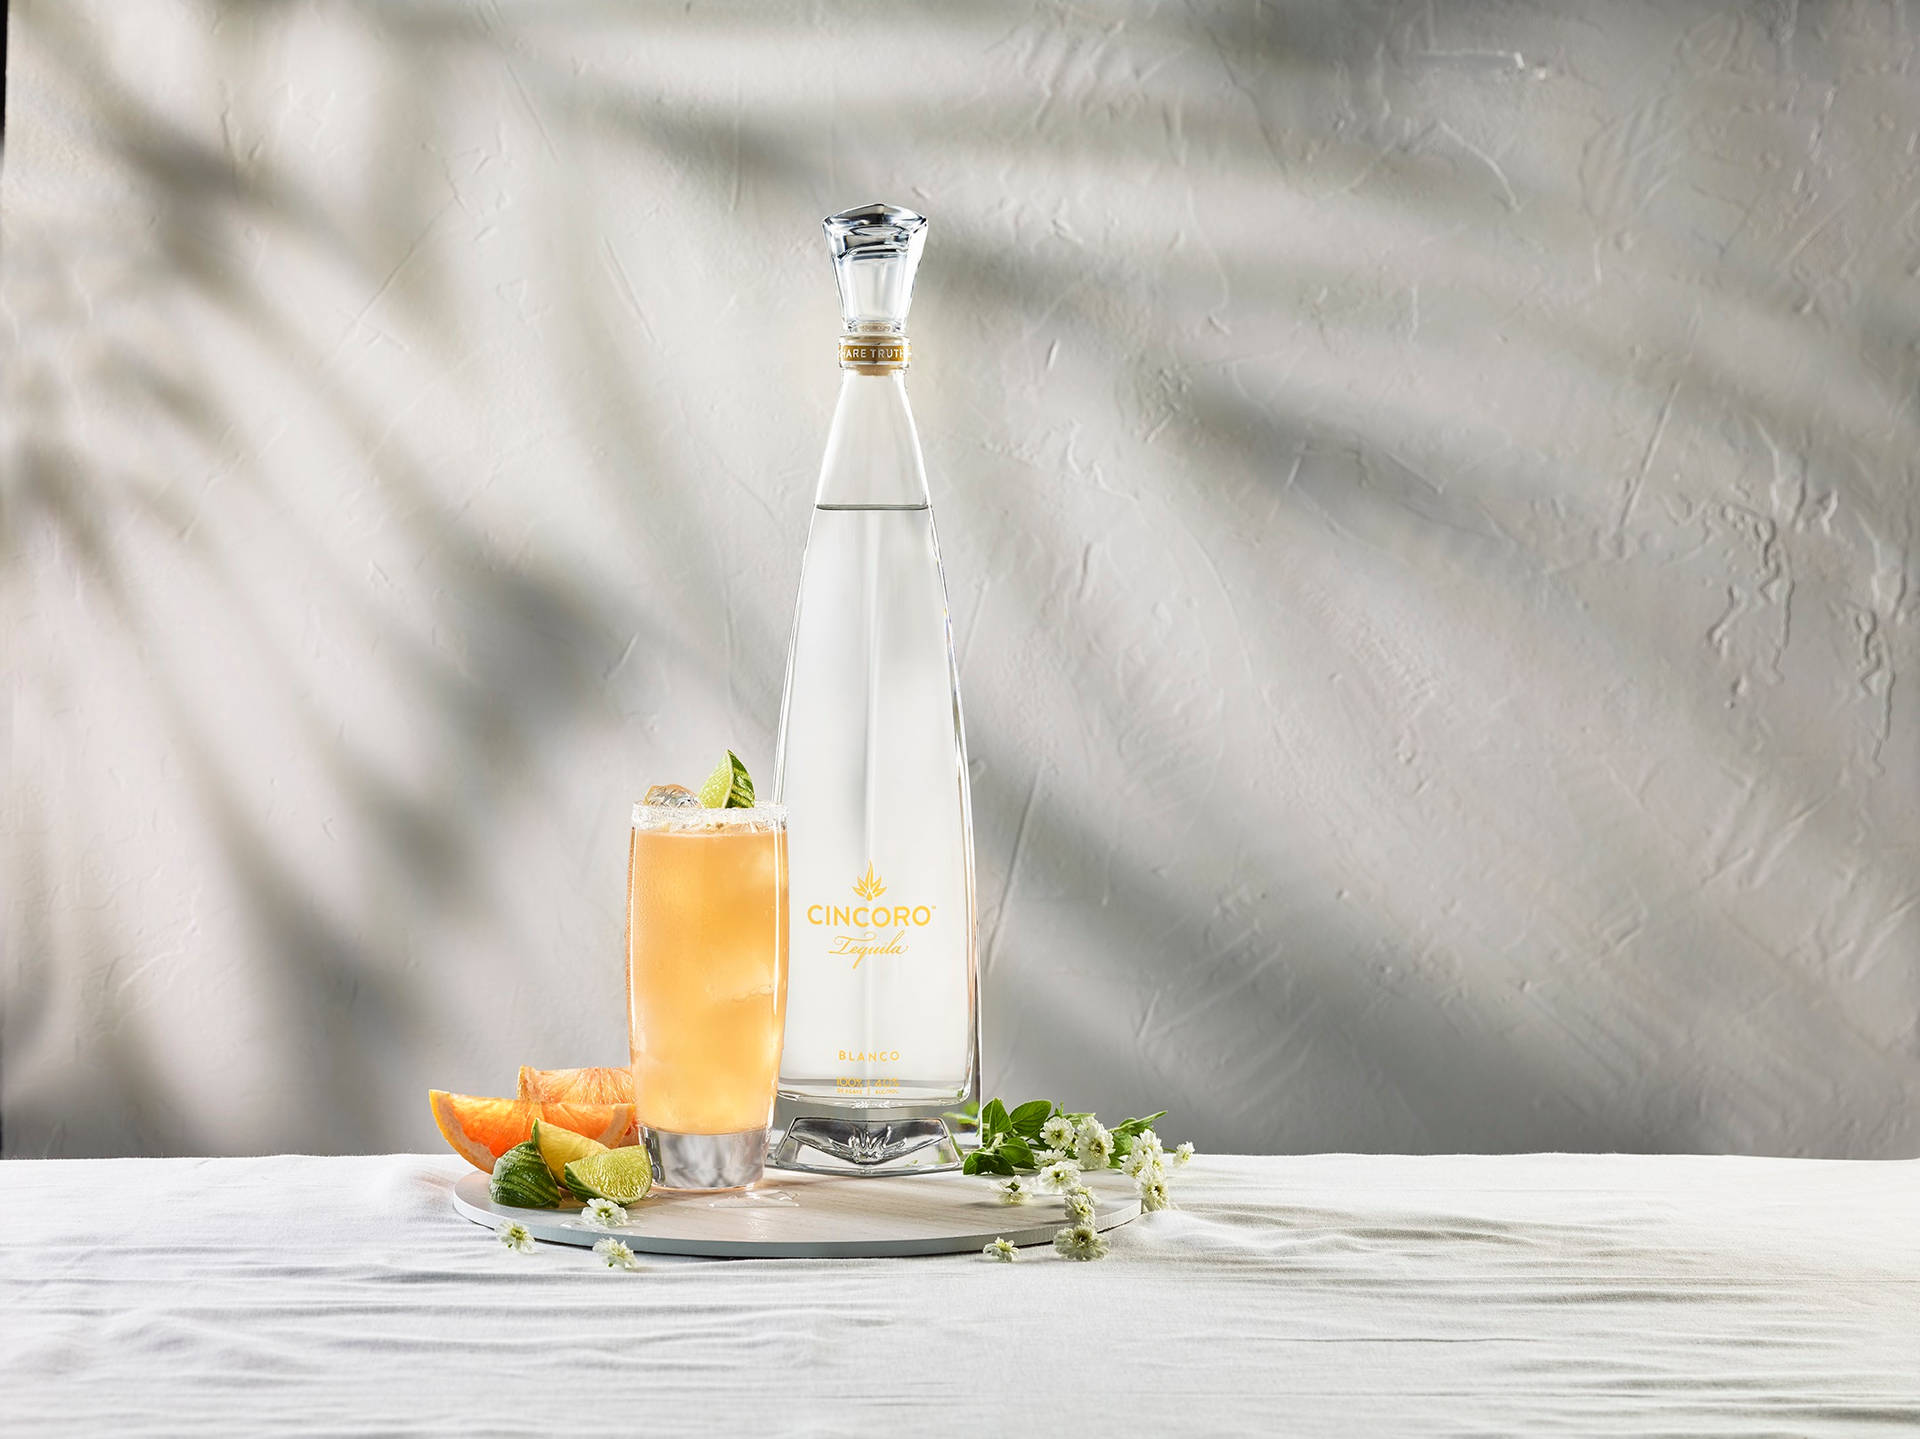 Exquisite Cincoro Tequila Bottle paired with luscious Margaritas Wallpaper